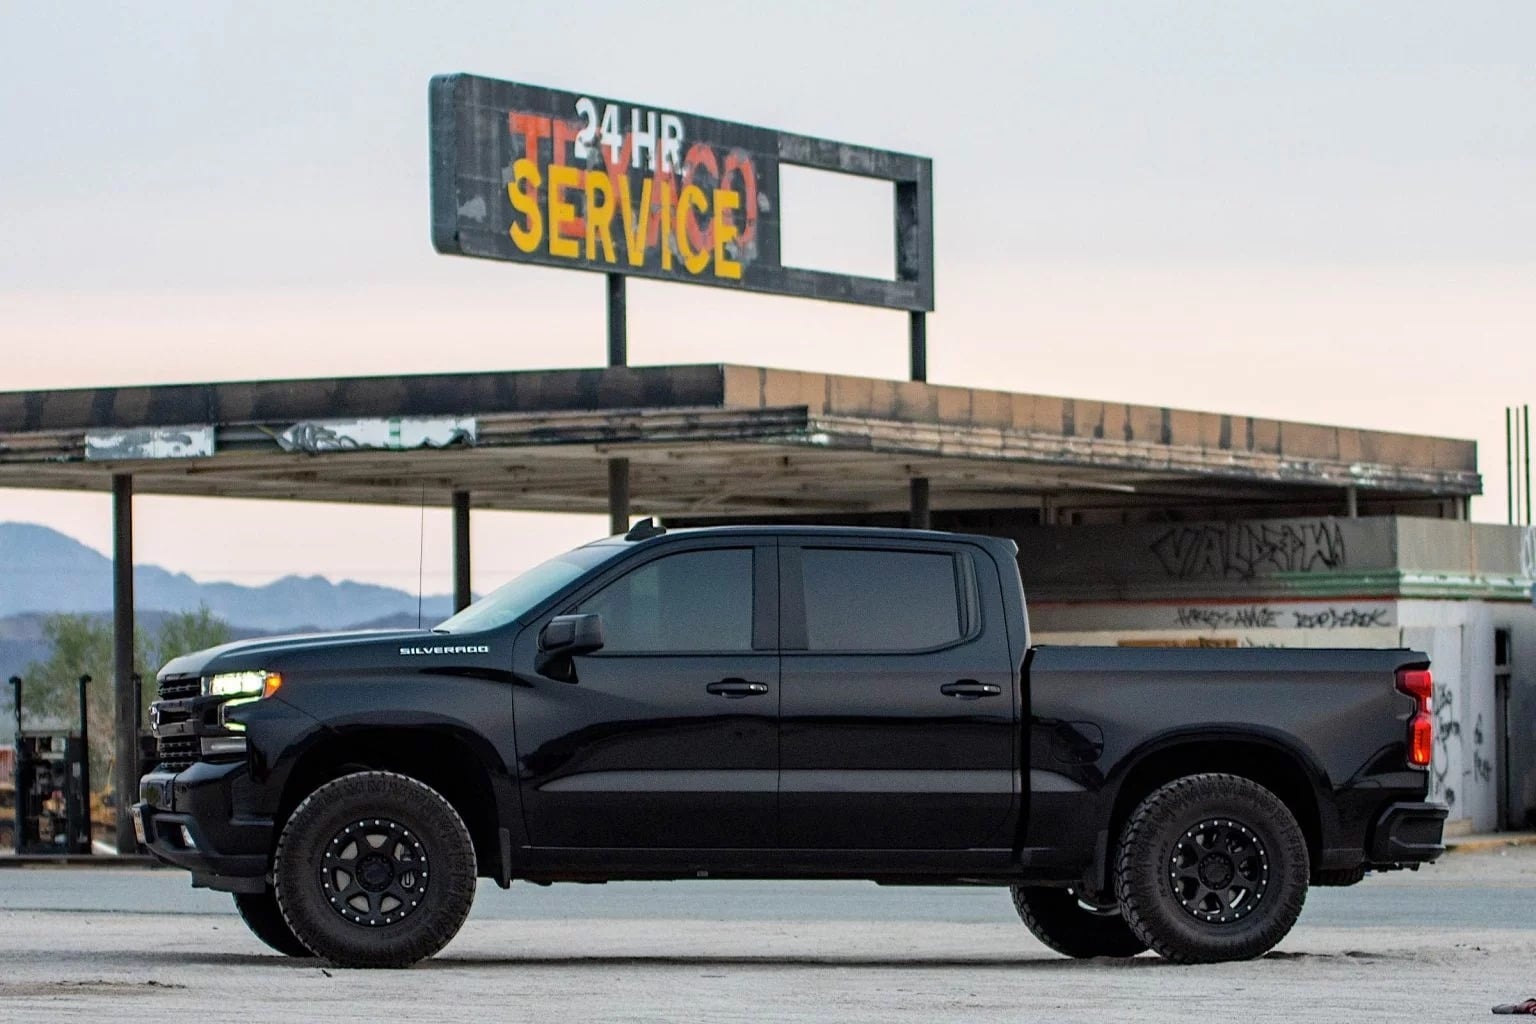 2019 Chevrolet Silverado in front of a service station sign.